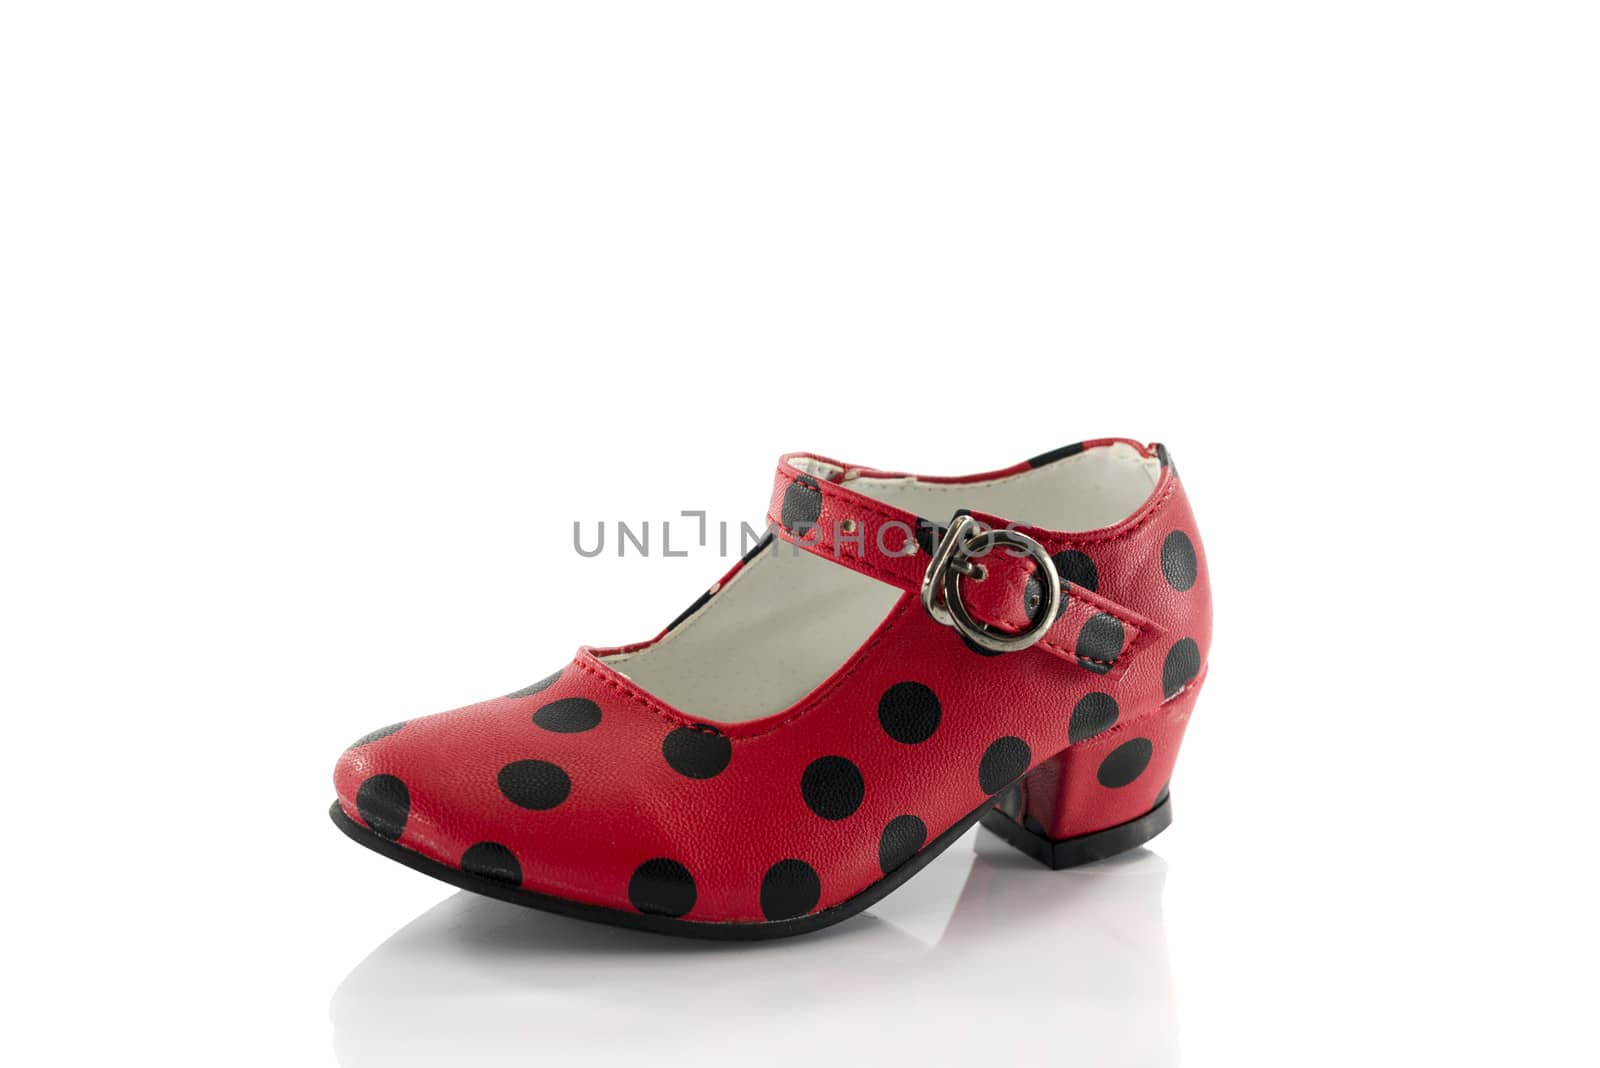 red shoes with black dots isolated on white